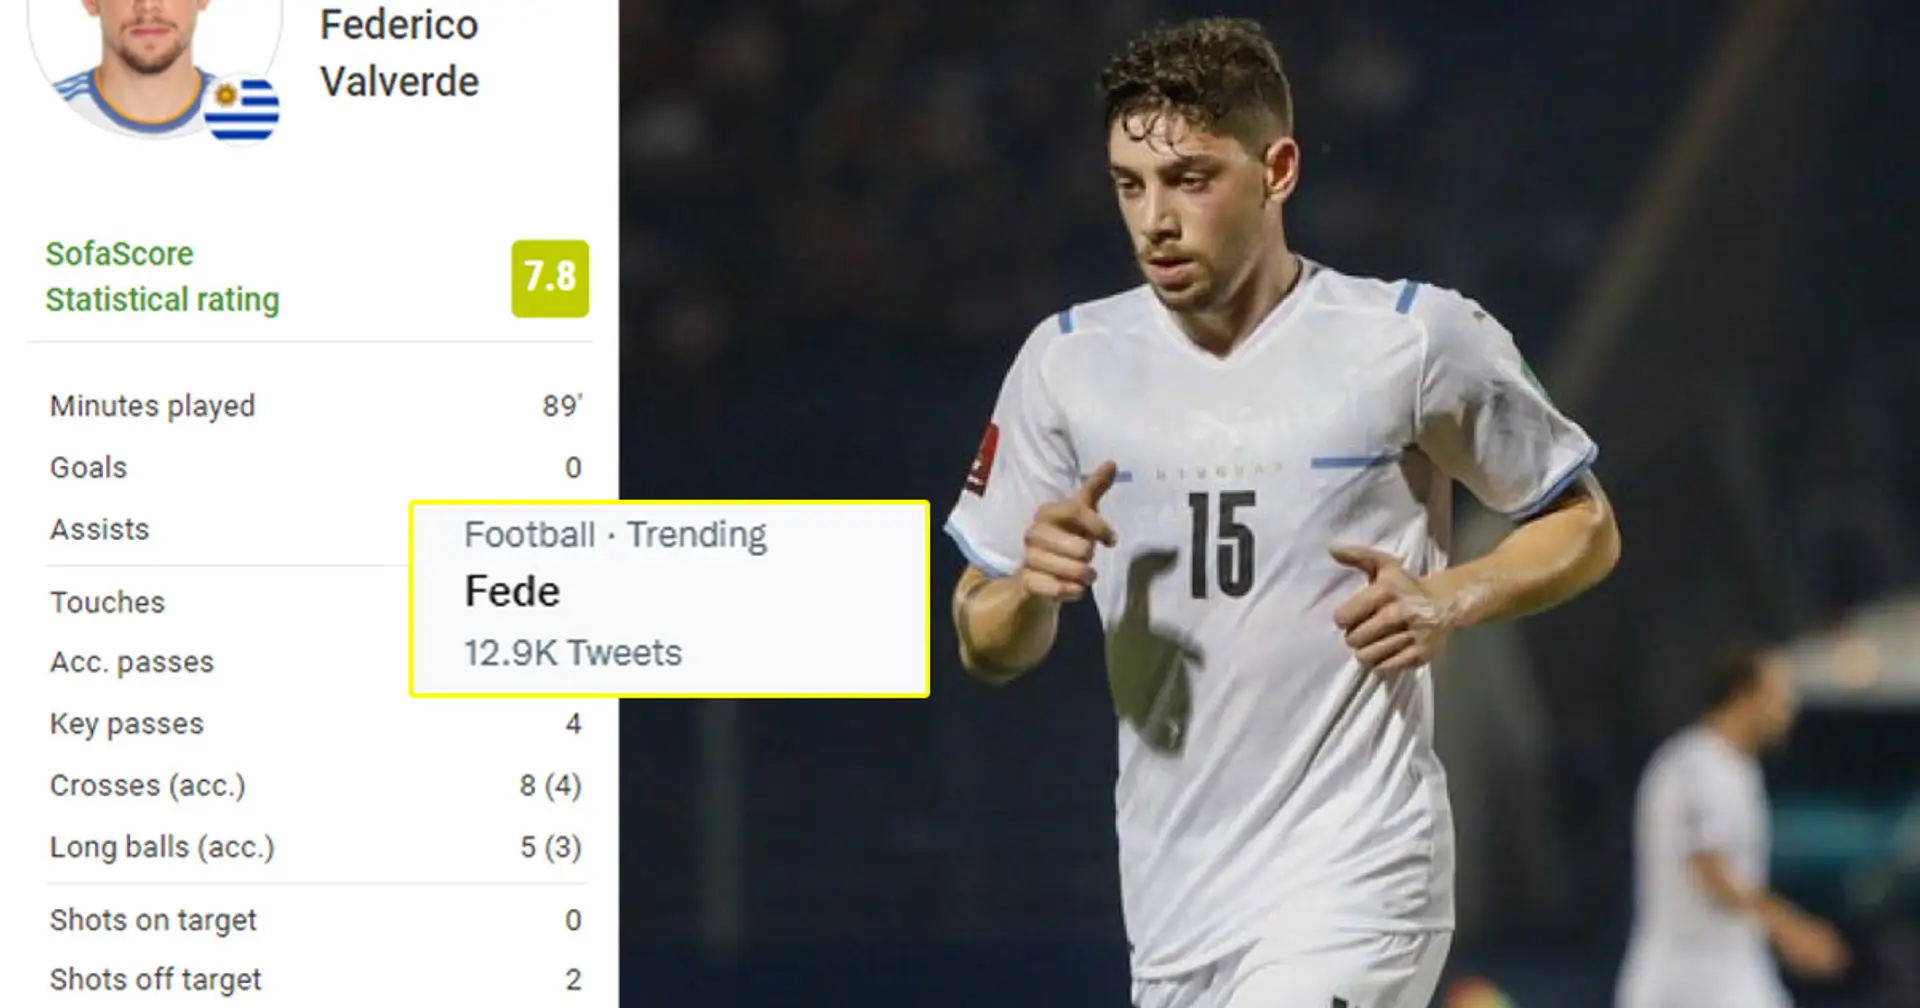 Why Fede Valverde is trending among Real Madrid fans today